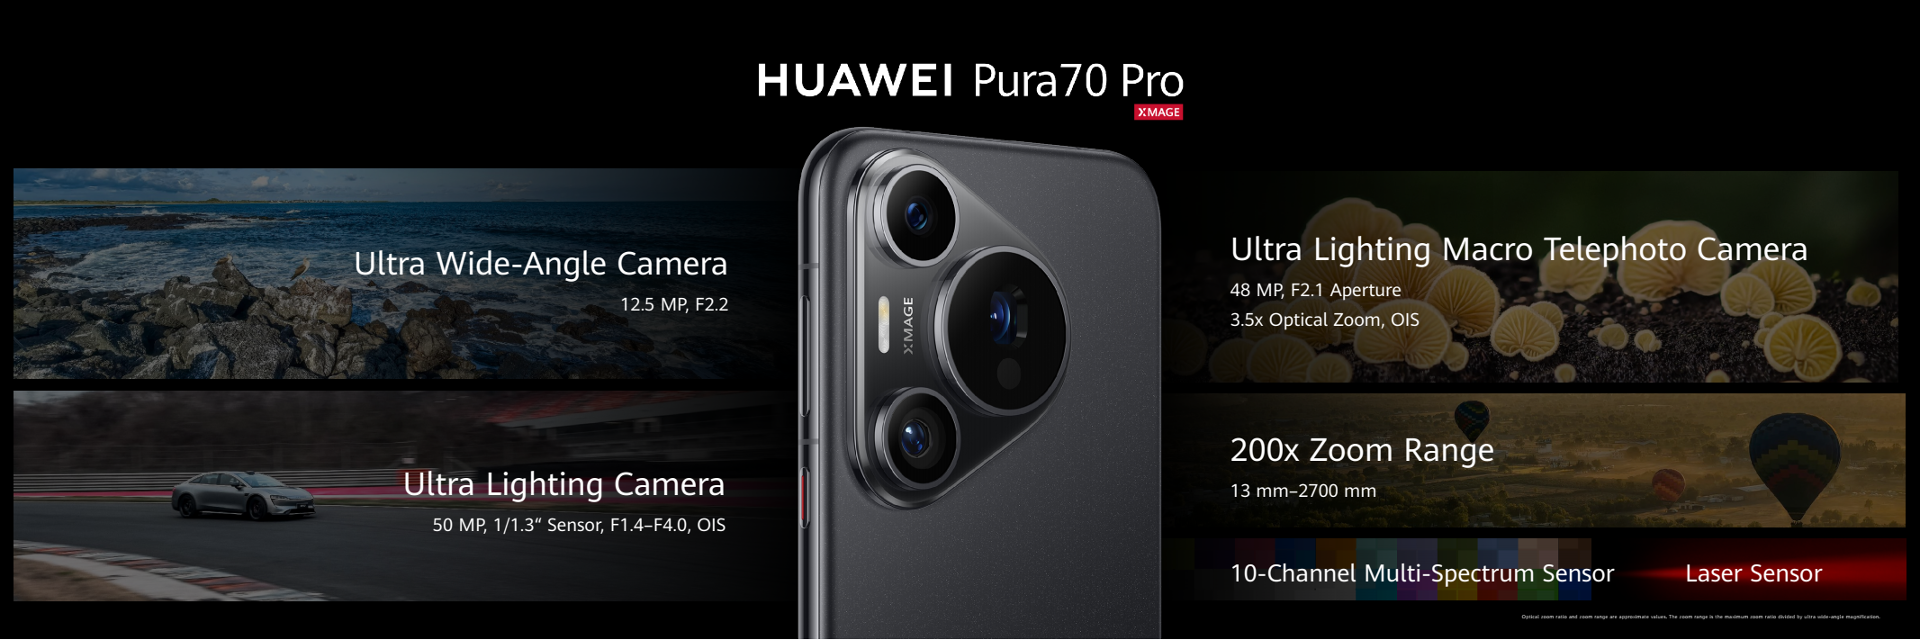 Huawei Pura 70 Pro Camera Specifications